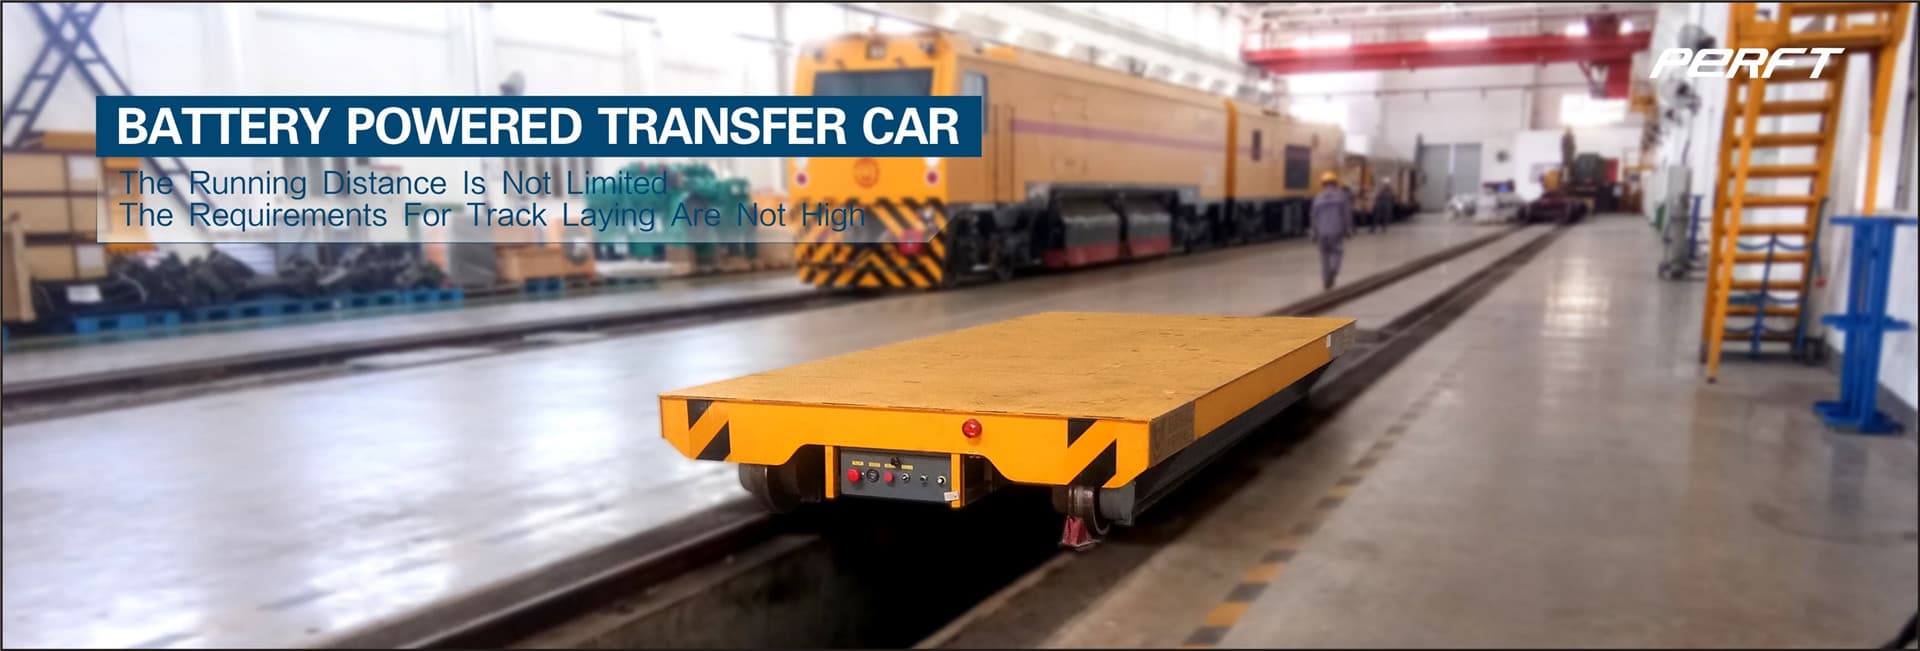 Perfect transfer carts on rail hot sale